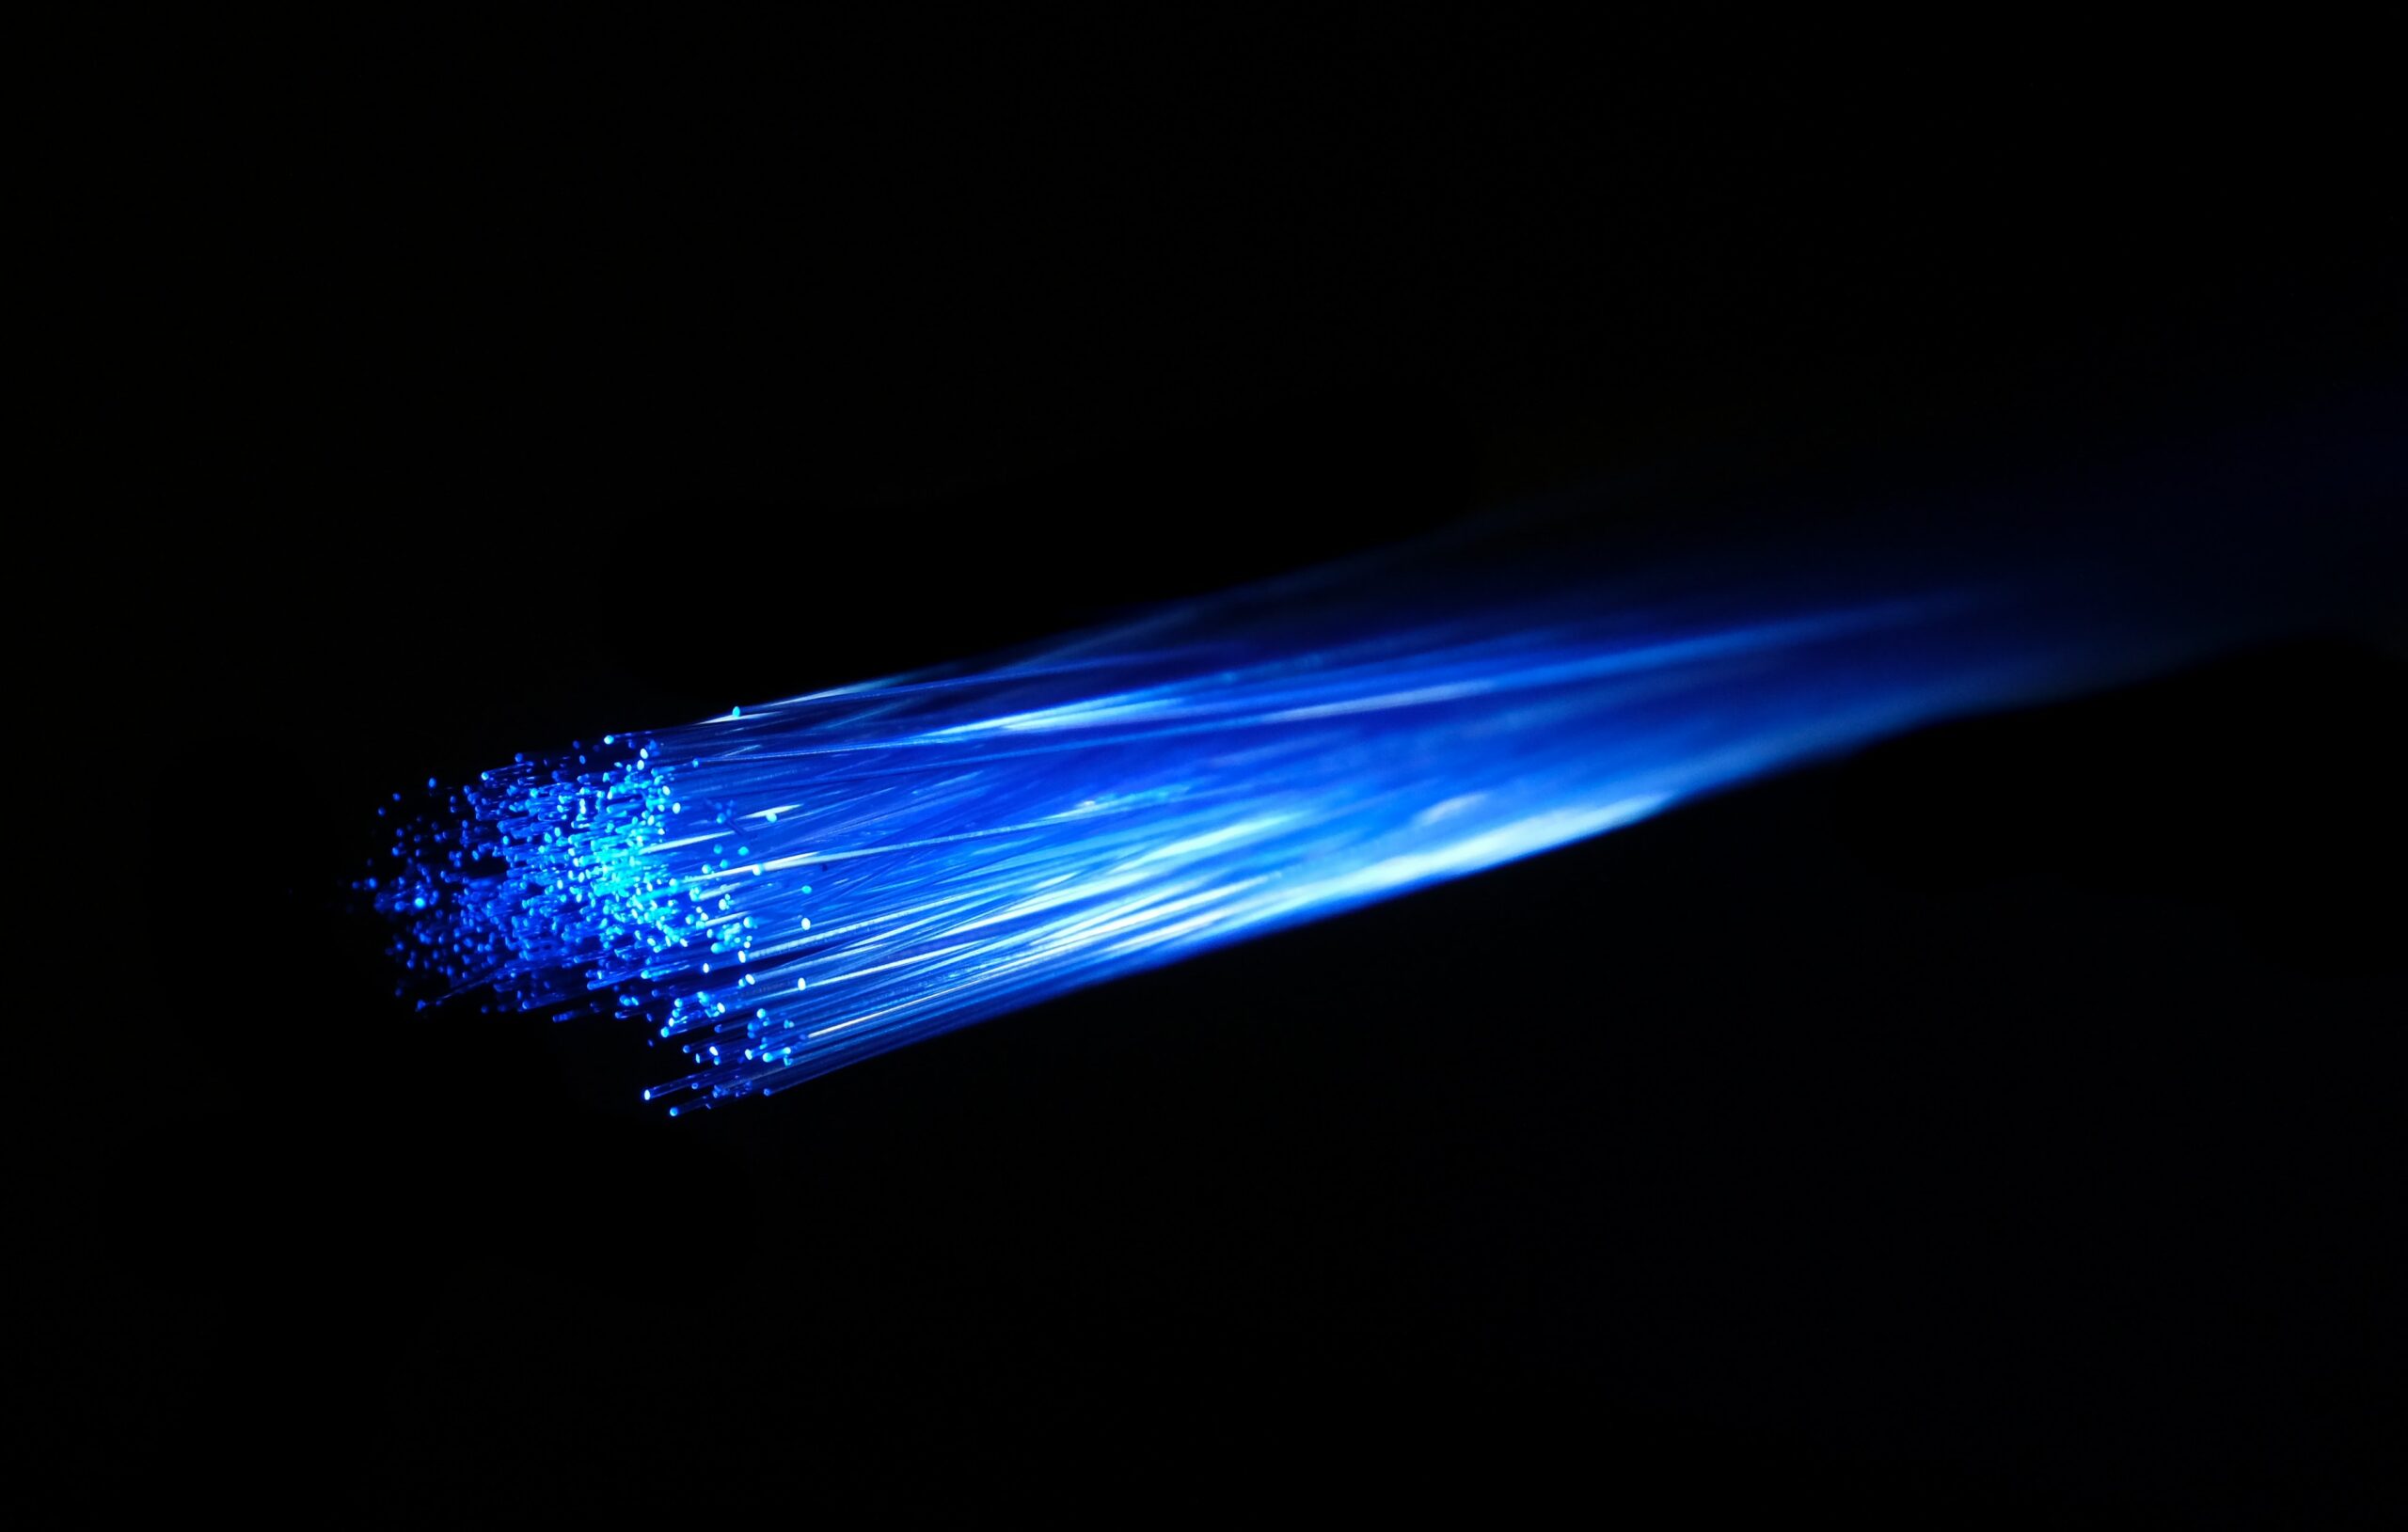 Full fibre broadband has potential to support Wales' move to Net Zero.